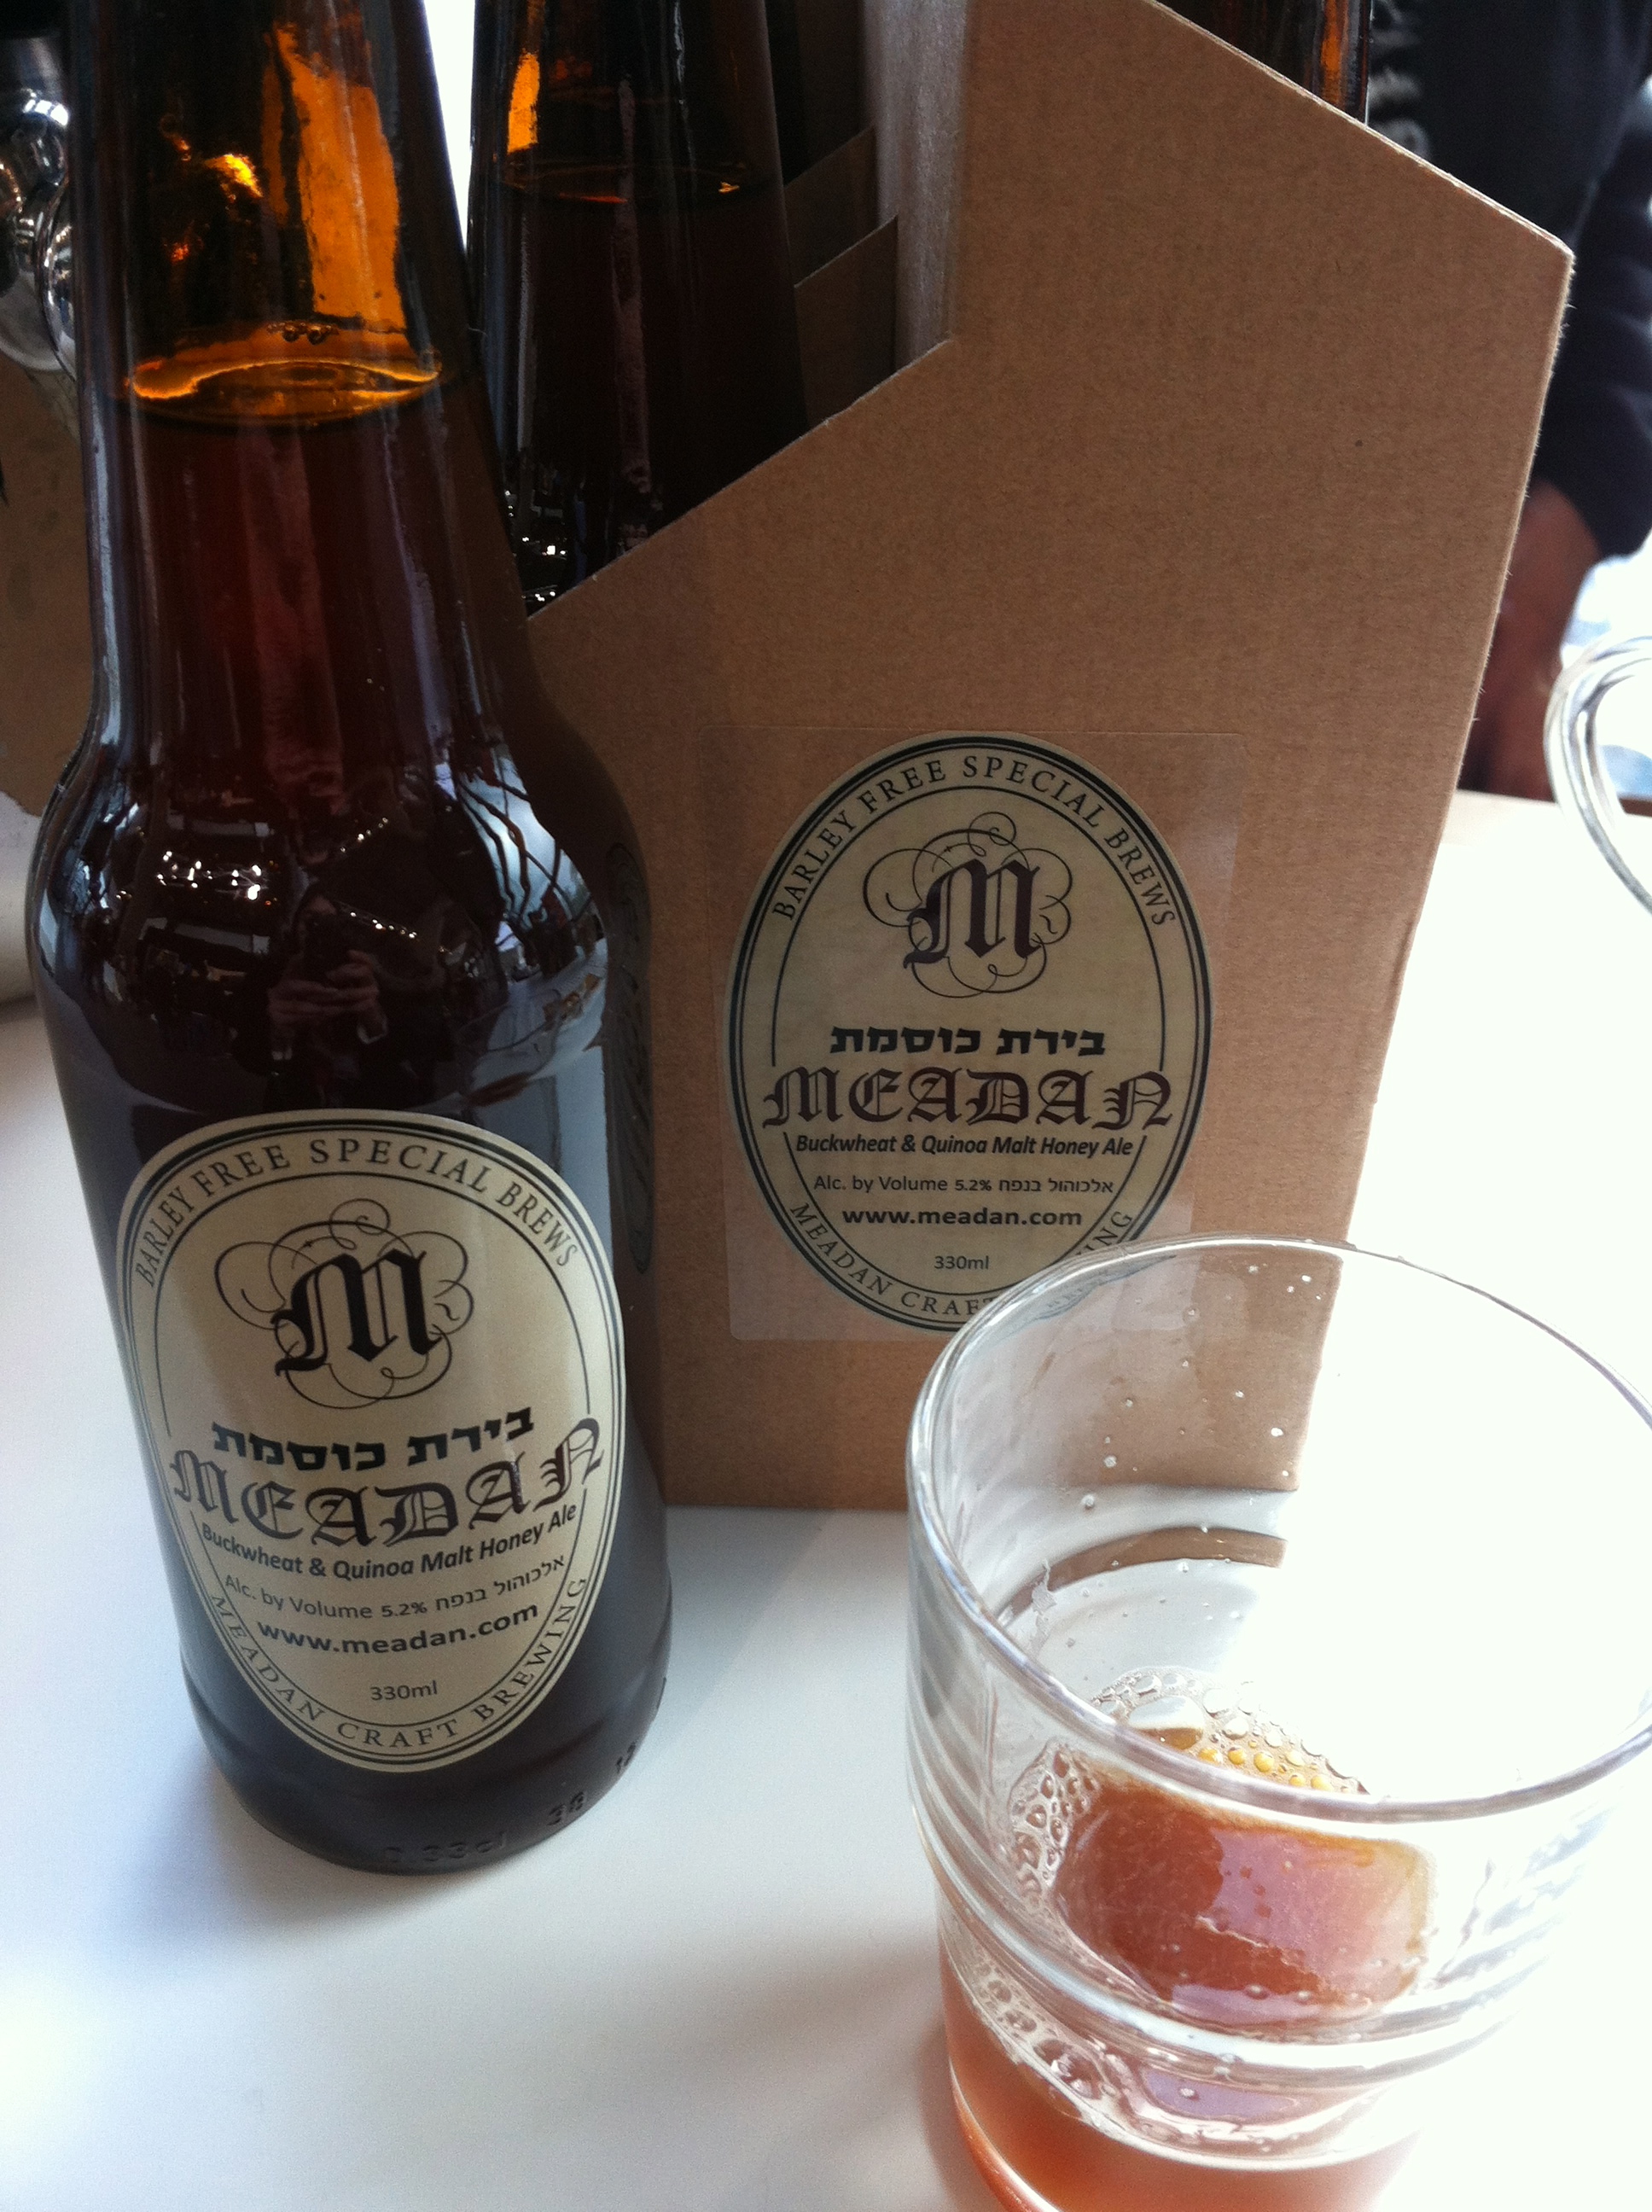 GLUTEN FREE BEER!! With buckwheat and quinoa - and GOOD!